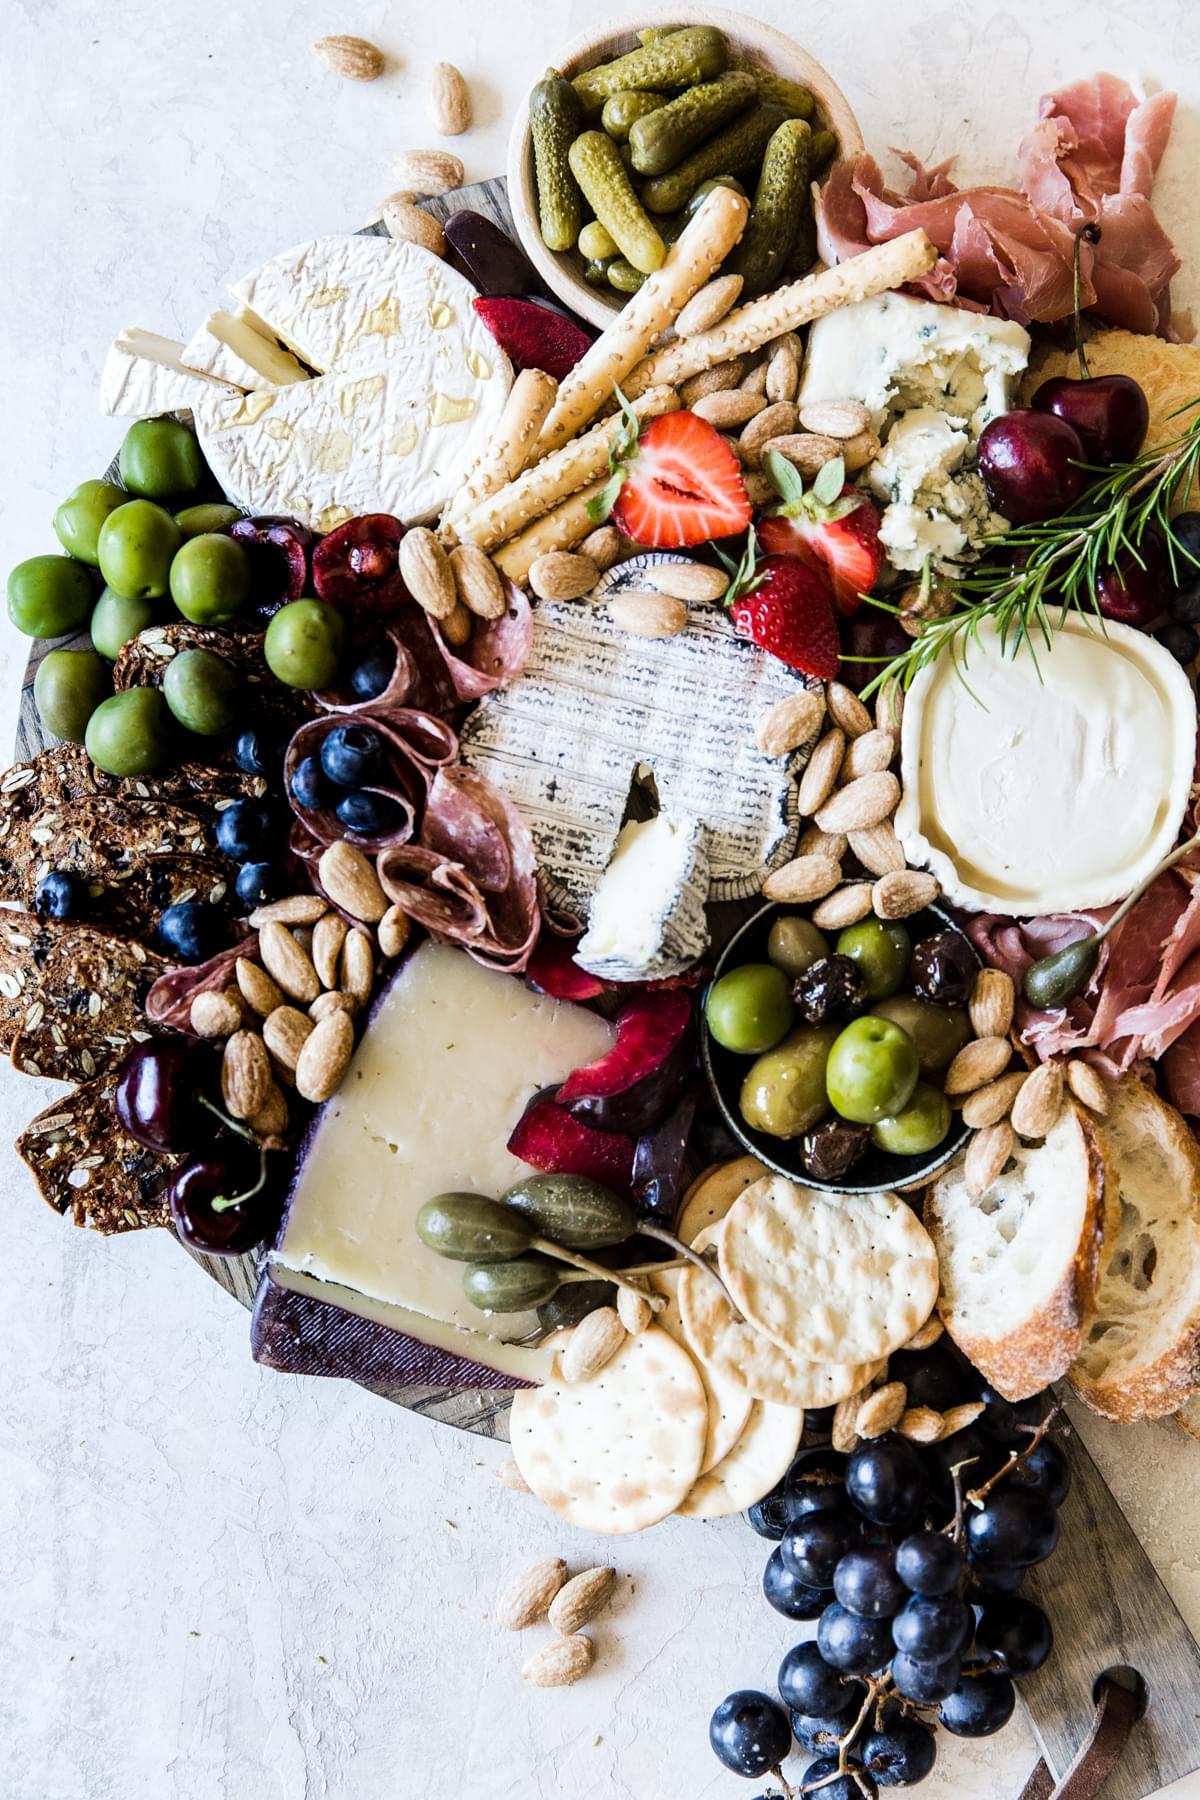 How To Build The Perfect Cheese Board